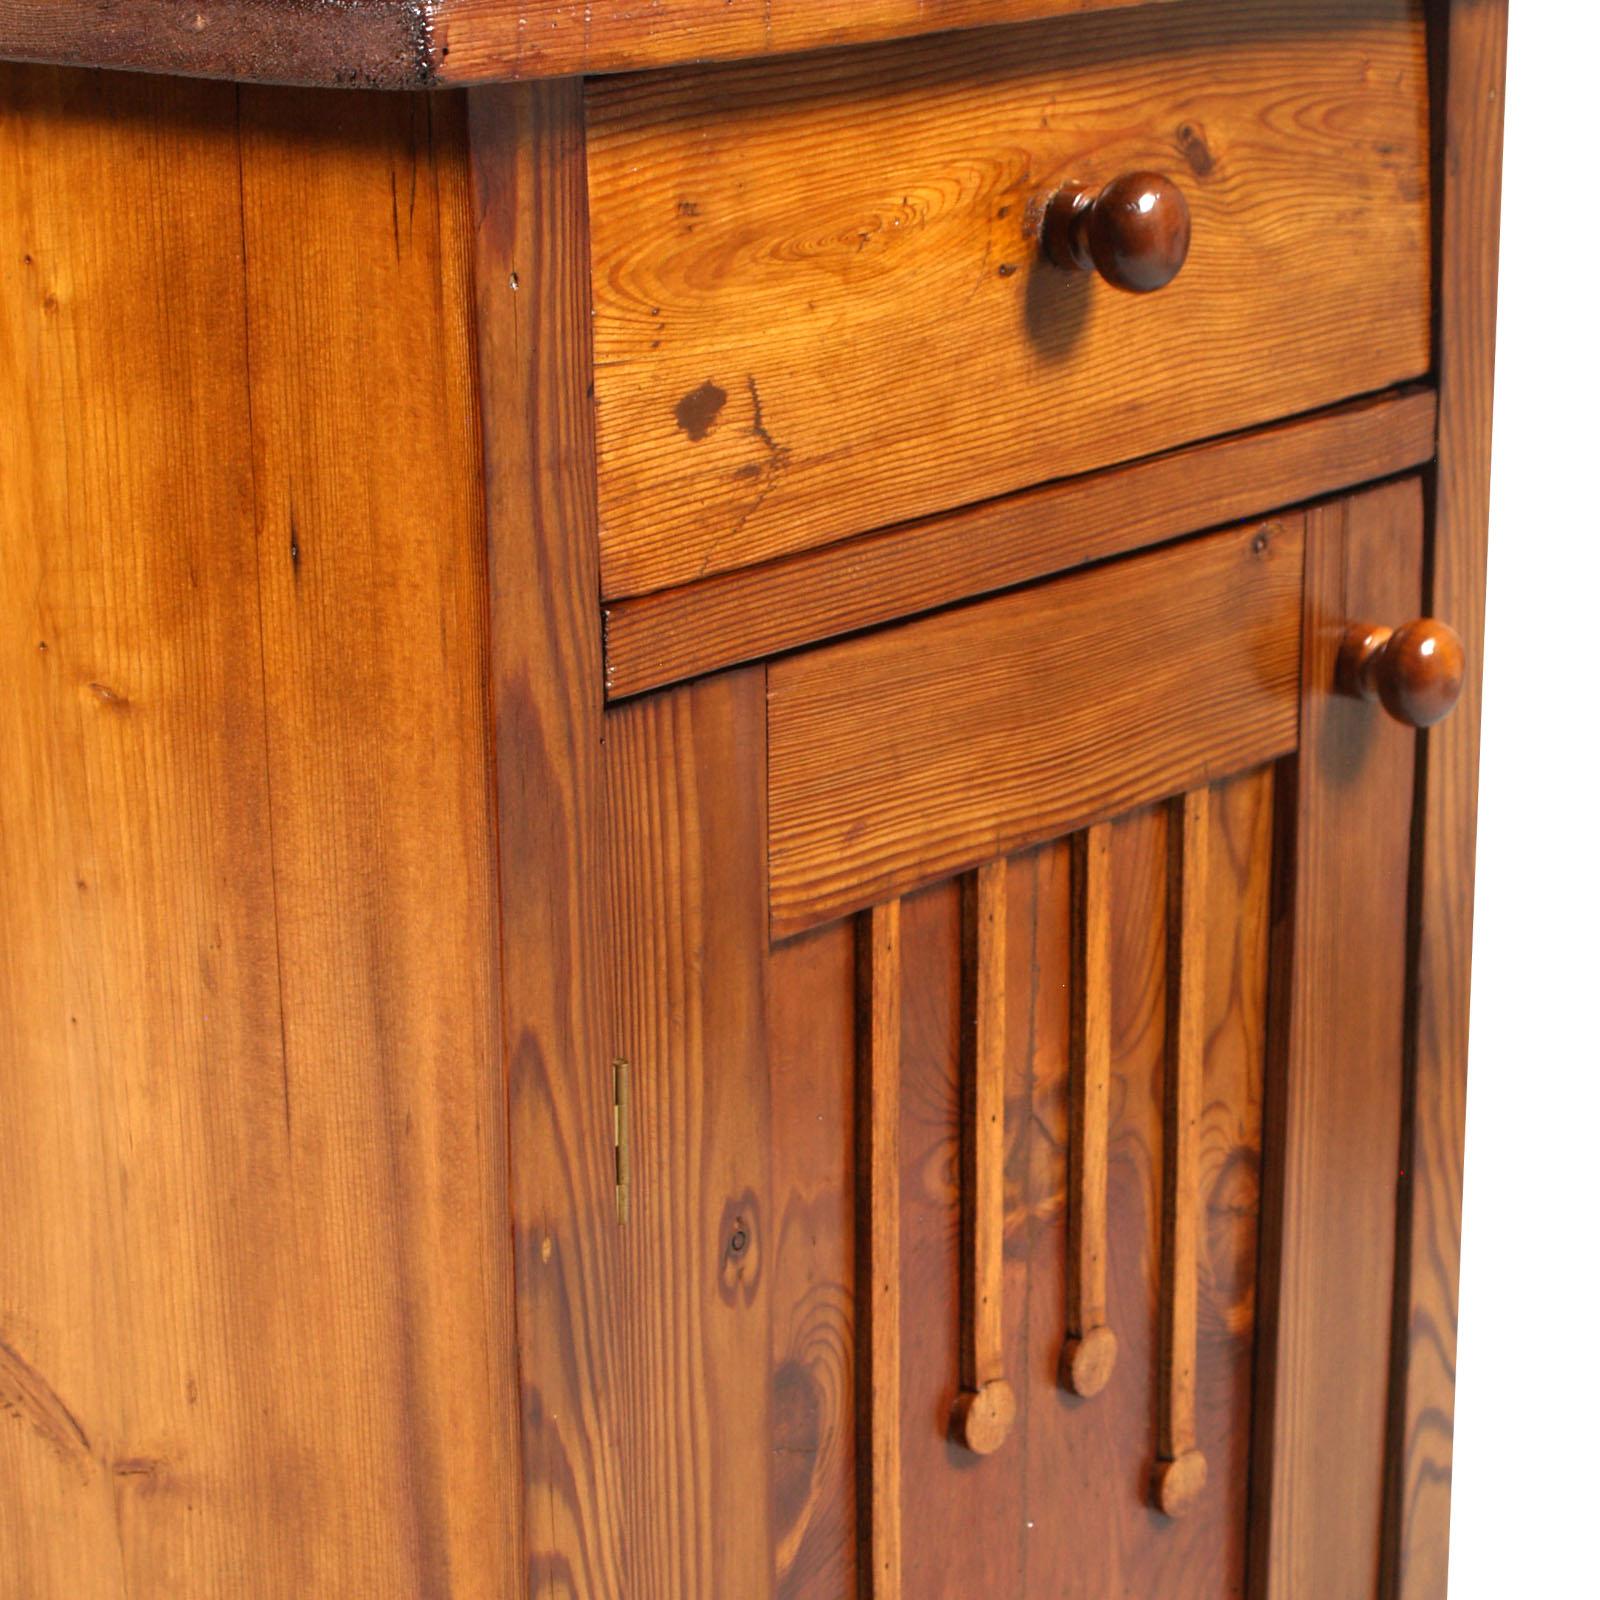 Italian 19th century or early 20th century Art Nouveau country rustic nightstand cabinet restored and polished to wax, all solid pine.

Measure cm: H 80 W 48 D 31.